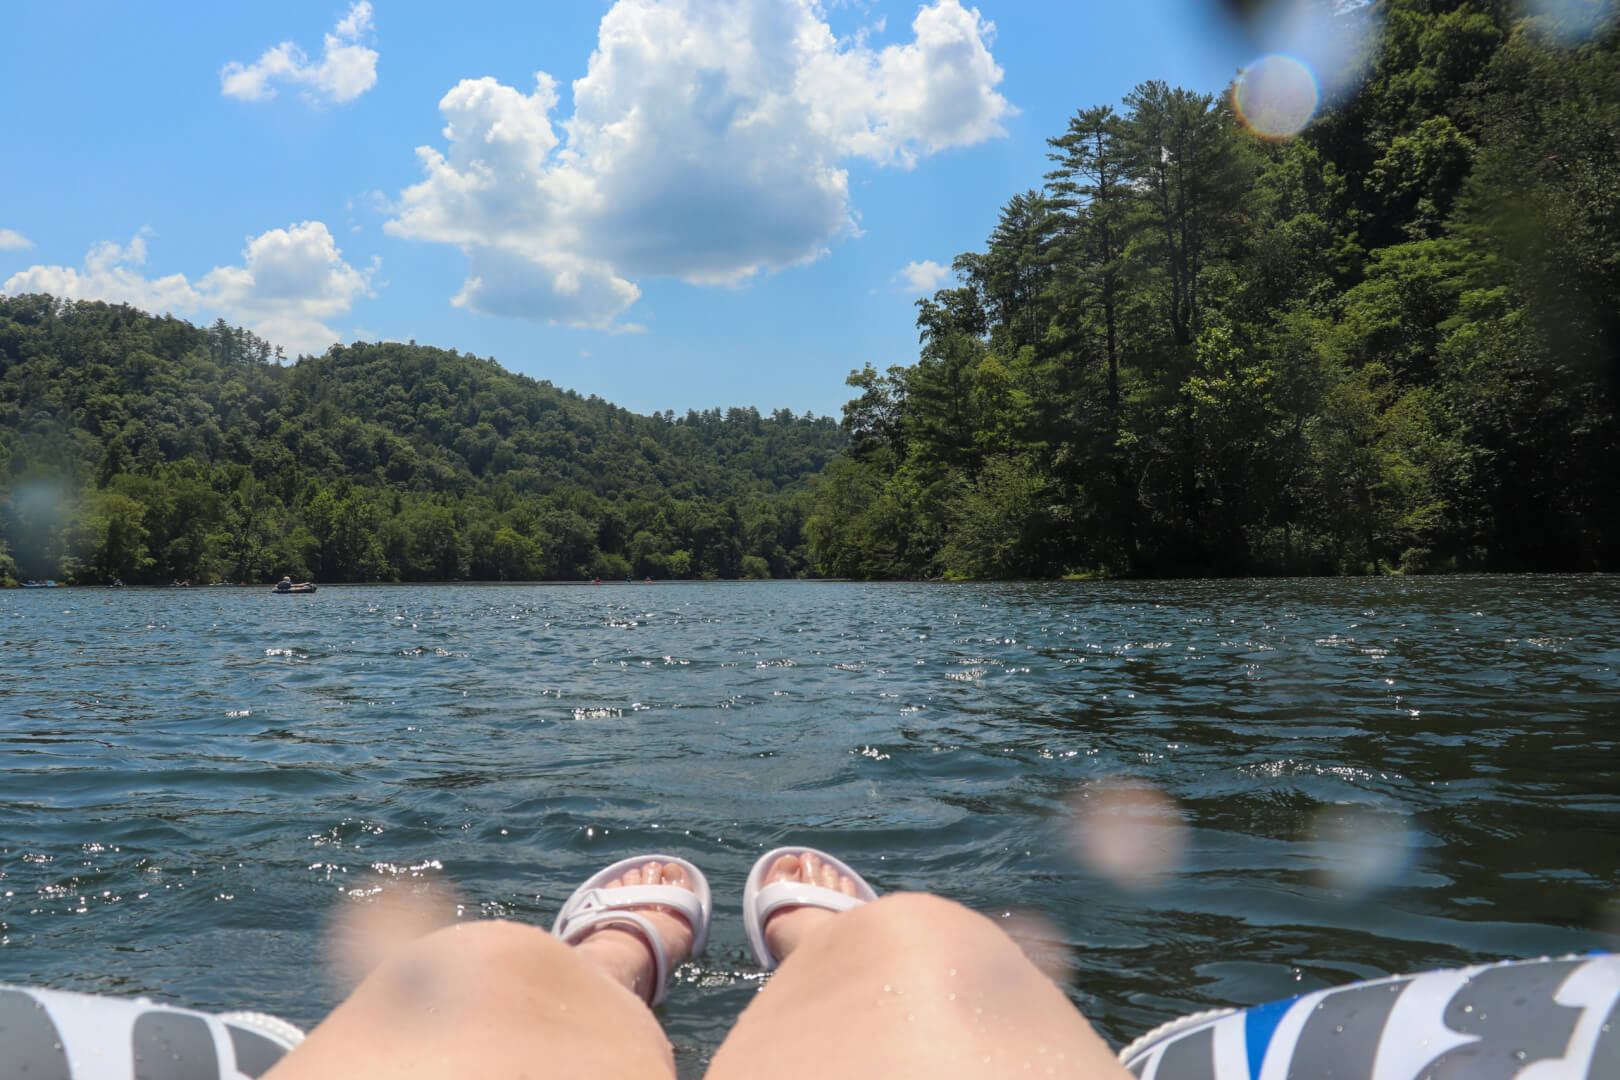 Try River Tubing on the Hiwassee River